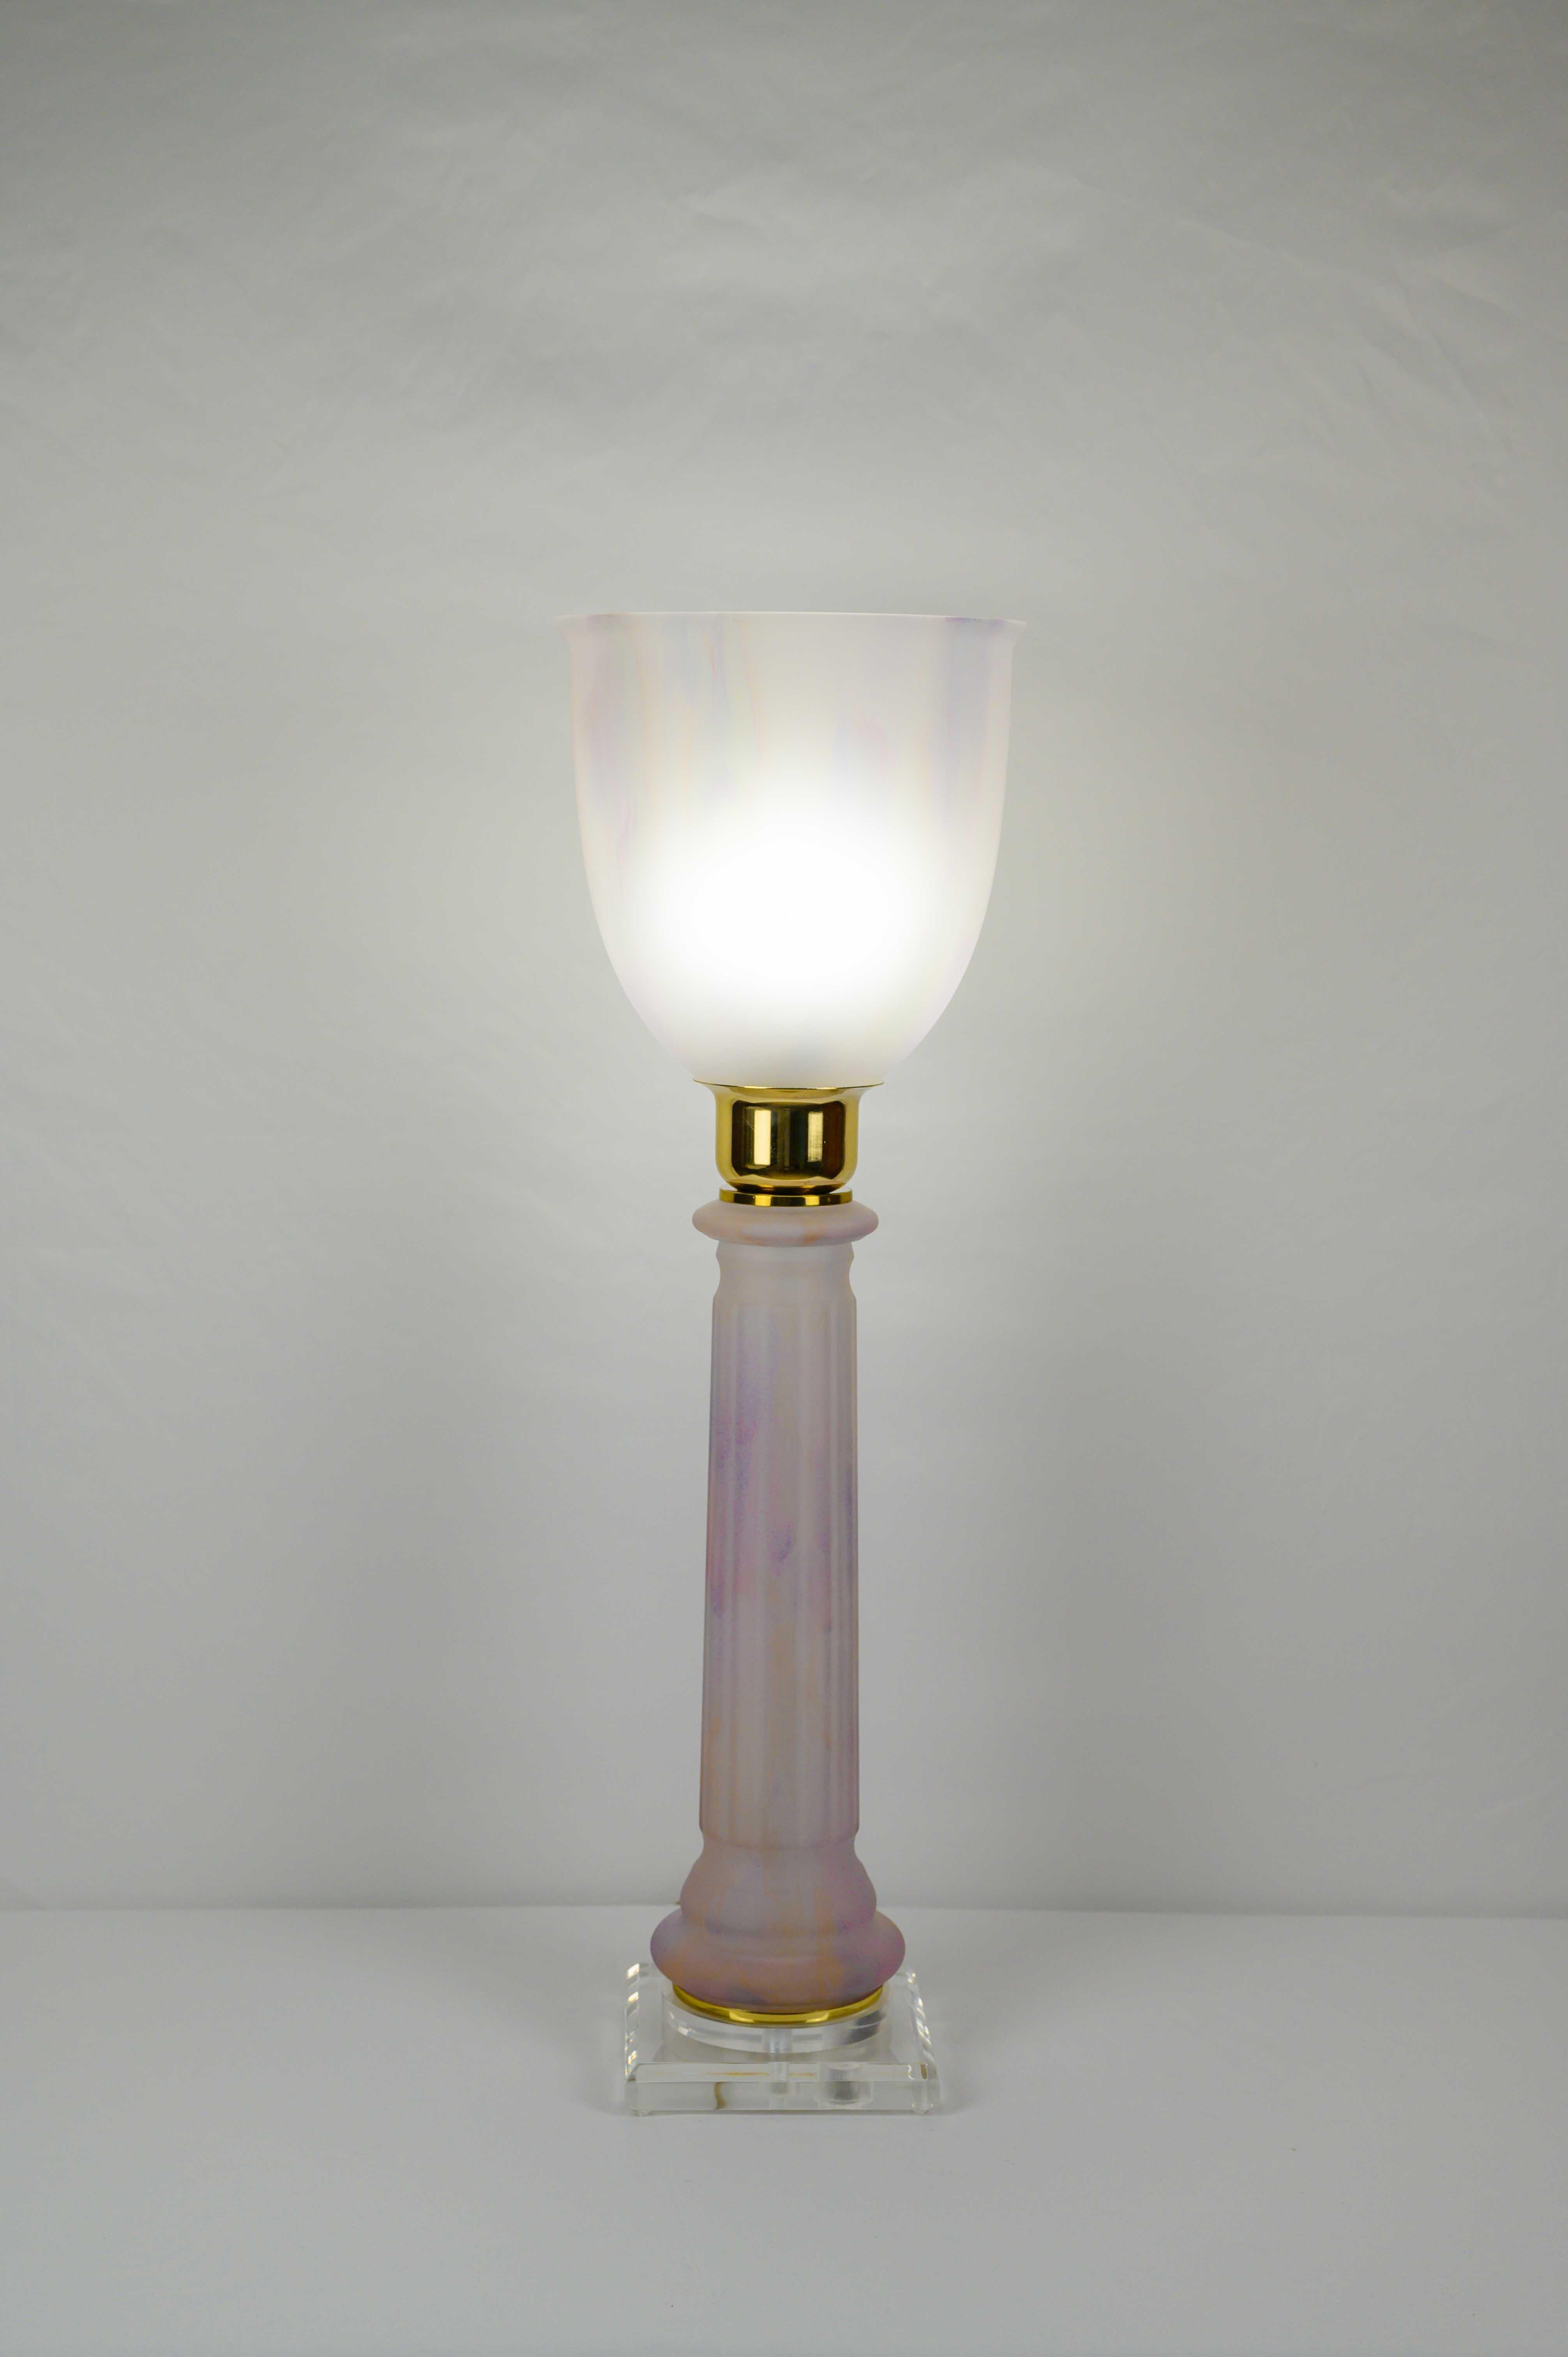 A fine quality table torchieres uplighter, made by Mazda, circa 1930s.

This beautiful French art deco table lamp by Mazda features a pale pink and pale white opaline glass shade with open top. Opaline base with brass detailing around the center of